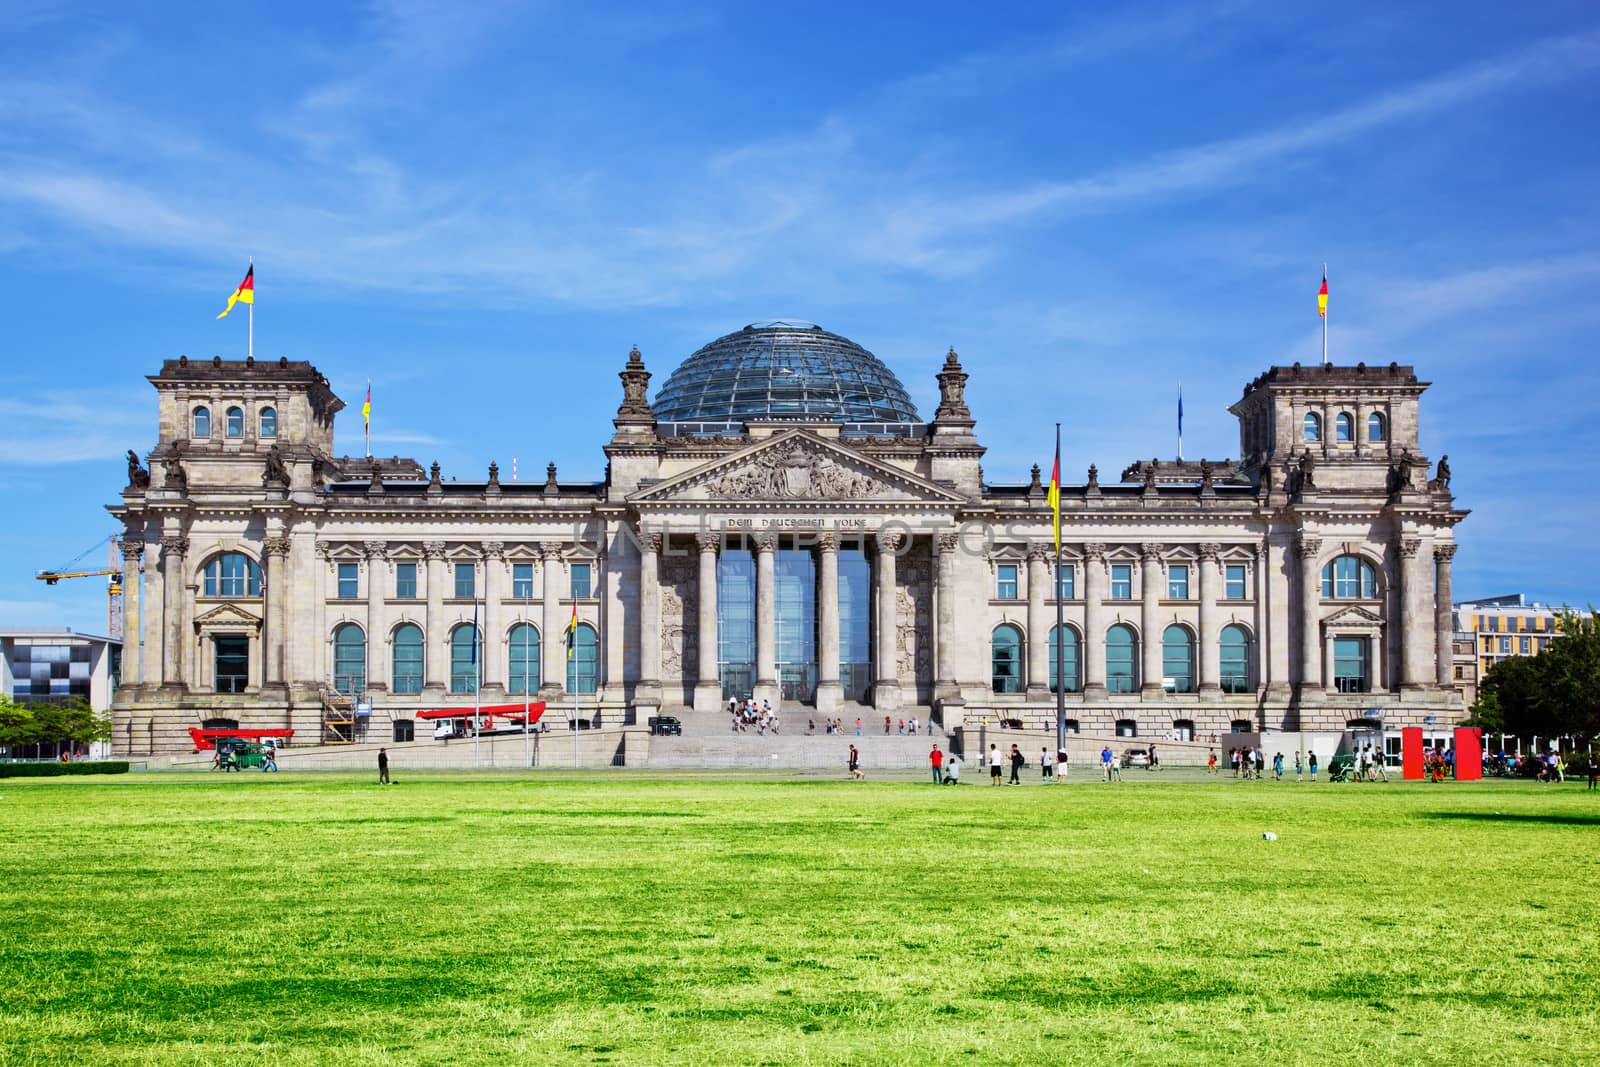 The Reichstag building. Berlin, Germany by photocreo